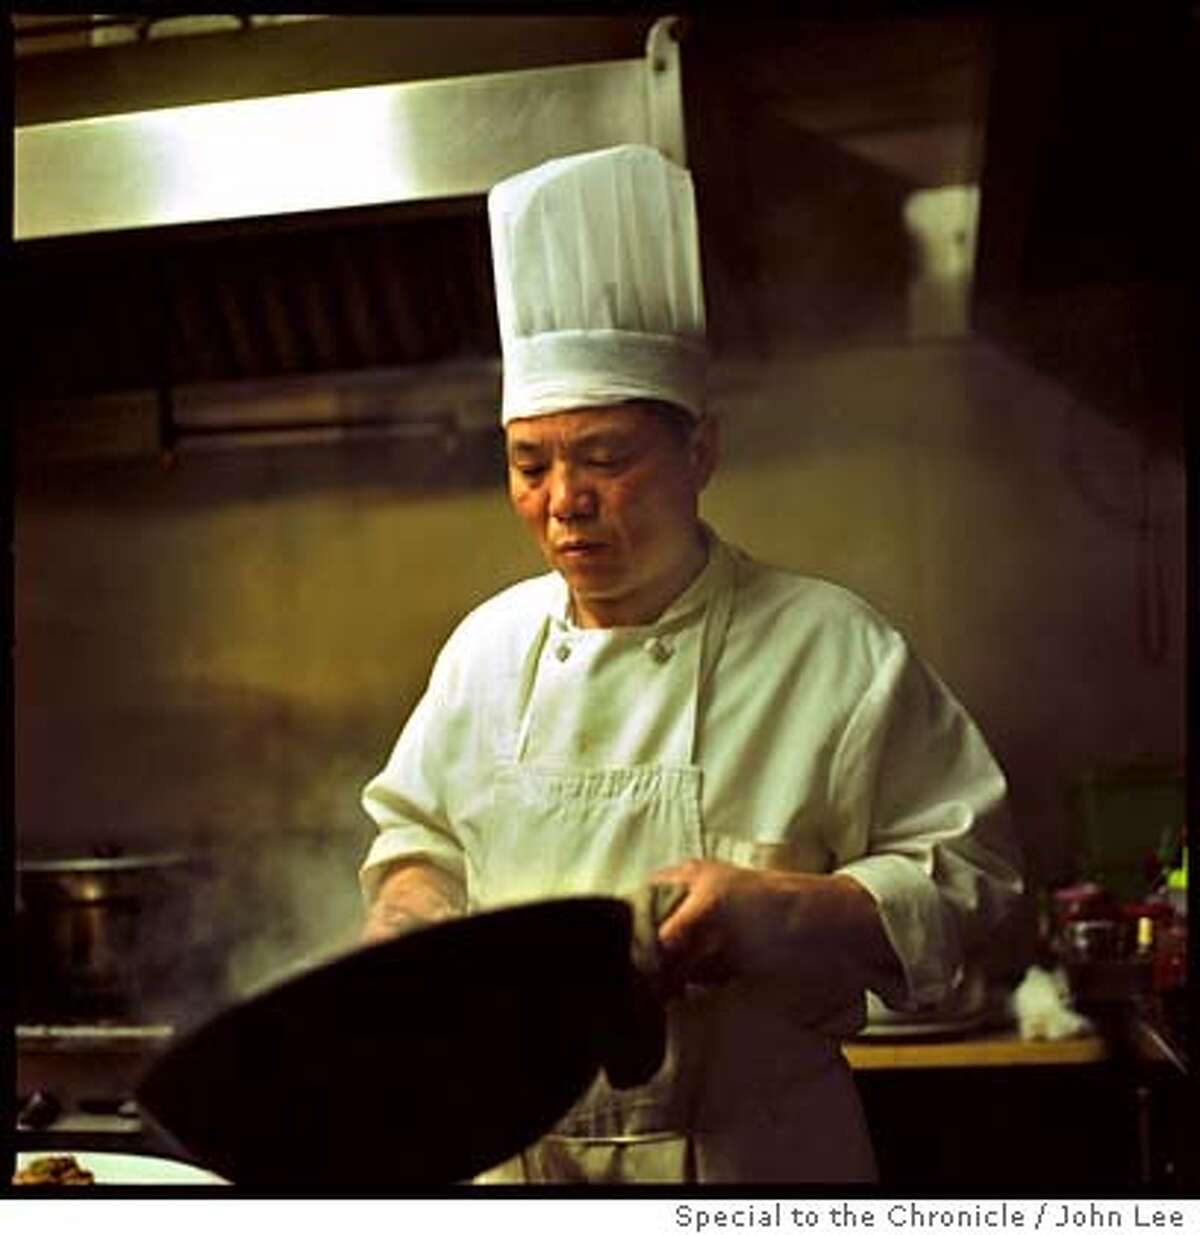 TOP 100 JAI YUN 04.jpg Chef Nei Chia Ji (cq) works with a wok in the kitchen at Jai Yun in San Francisco's Chinatown. By JOHN LEE/SPECIAL TO THE CHRONICLE Ran on: 04-01-2007 The main dining room at Thomas Kellers Ad Hoc in Yountville.